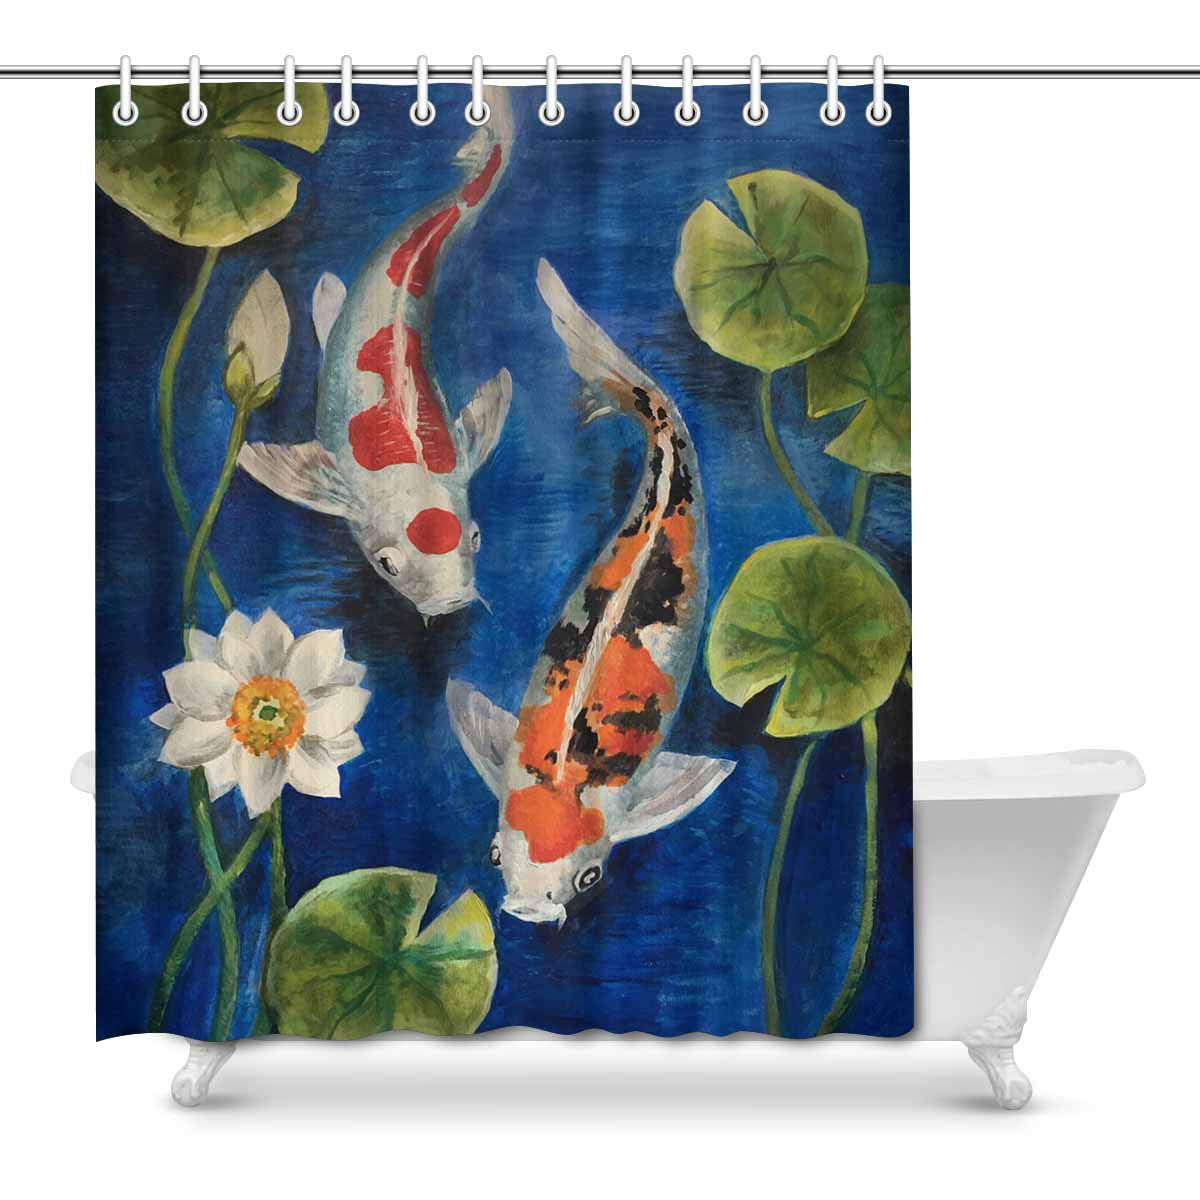 Water Lily And Koi In Pond Shower Curtain Set Waterproof Fabric & Hook 71Inch 